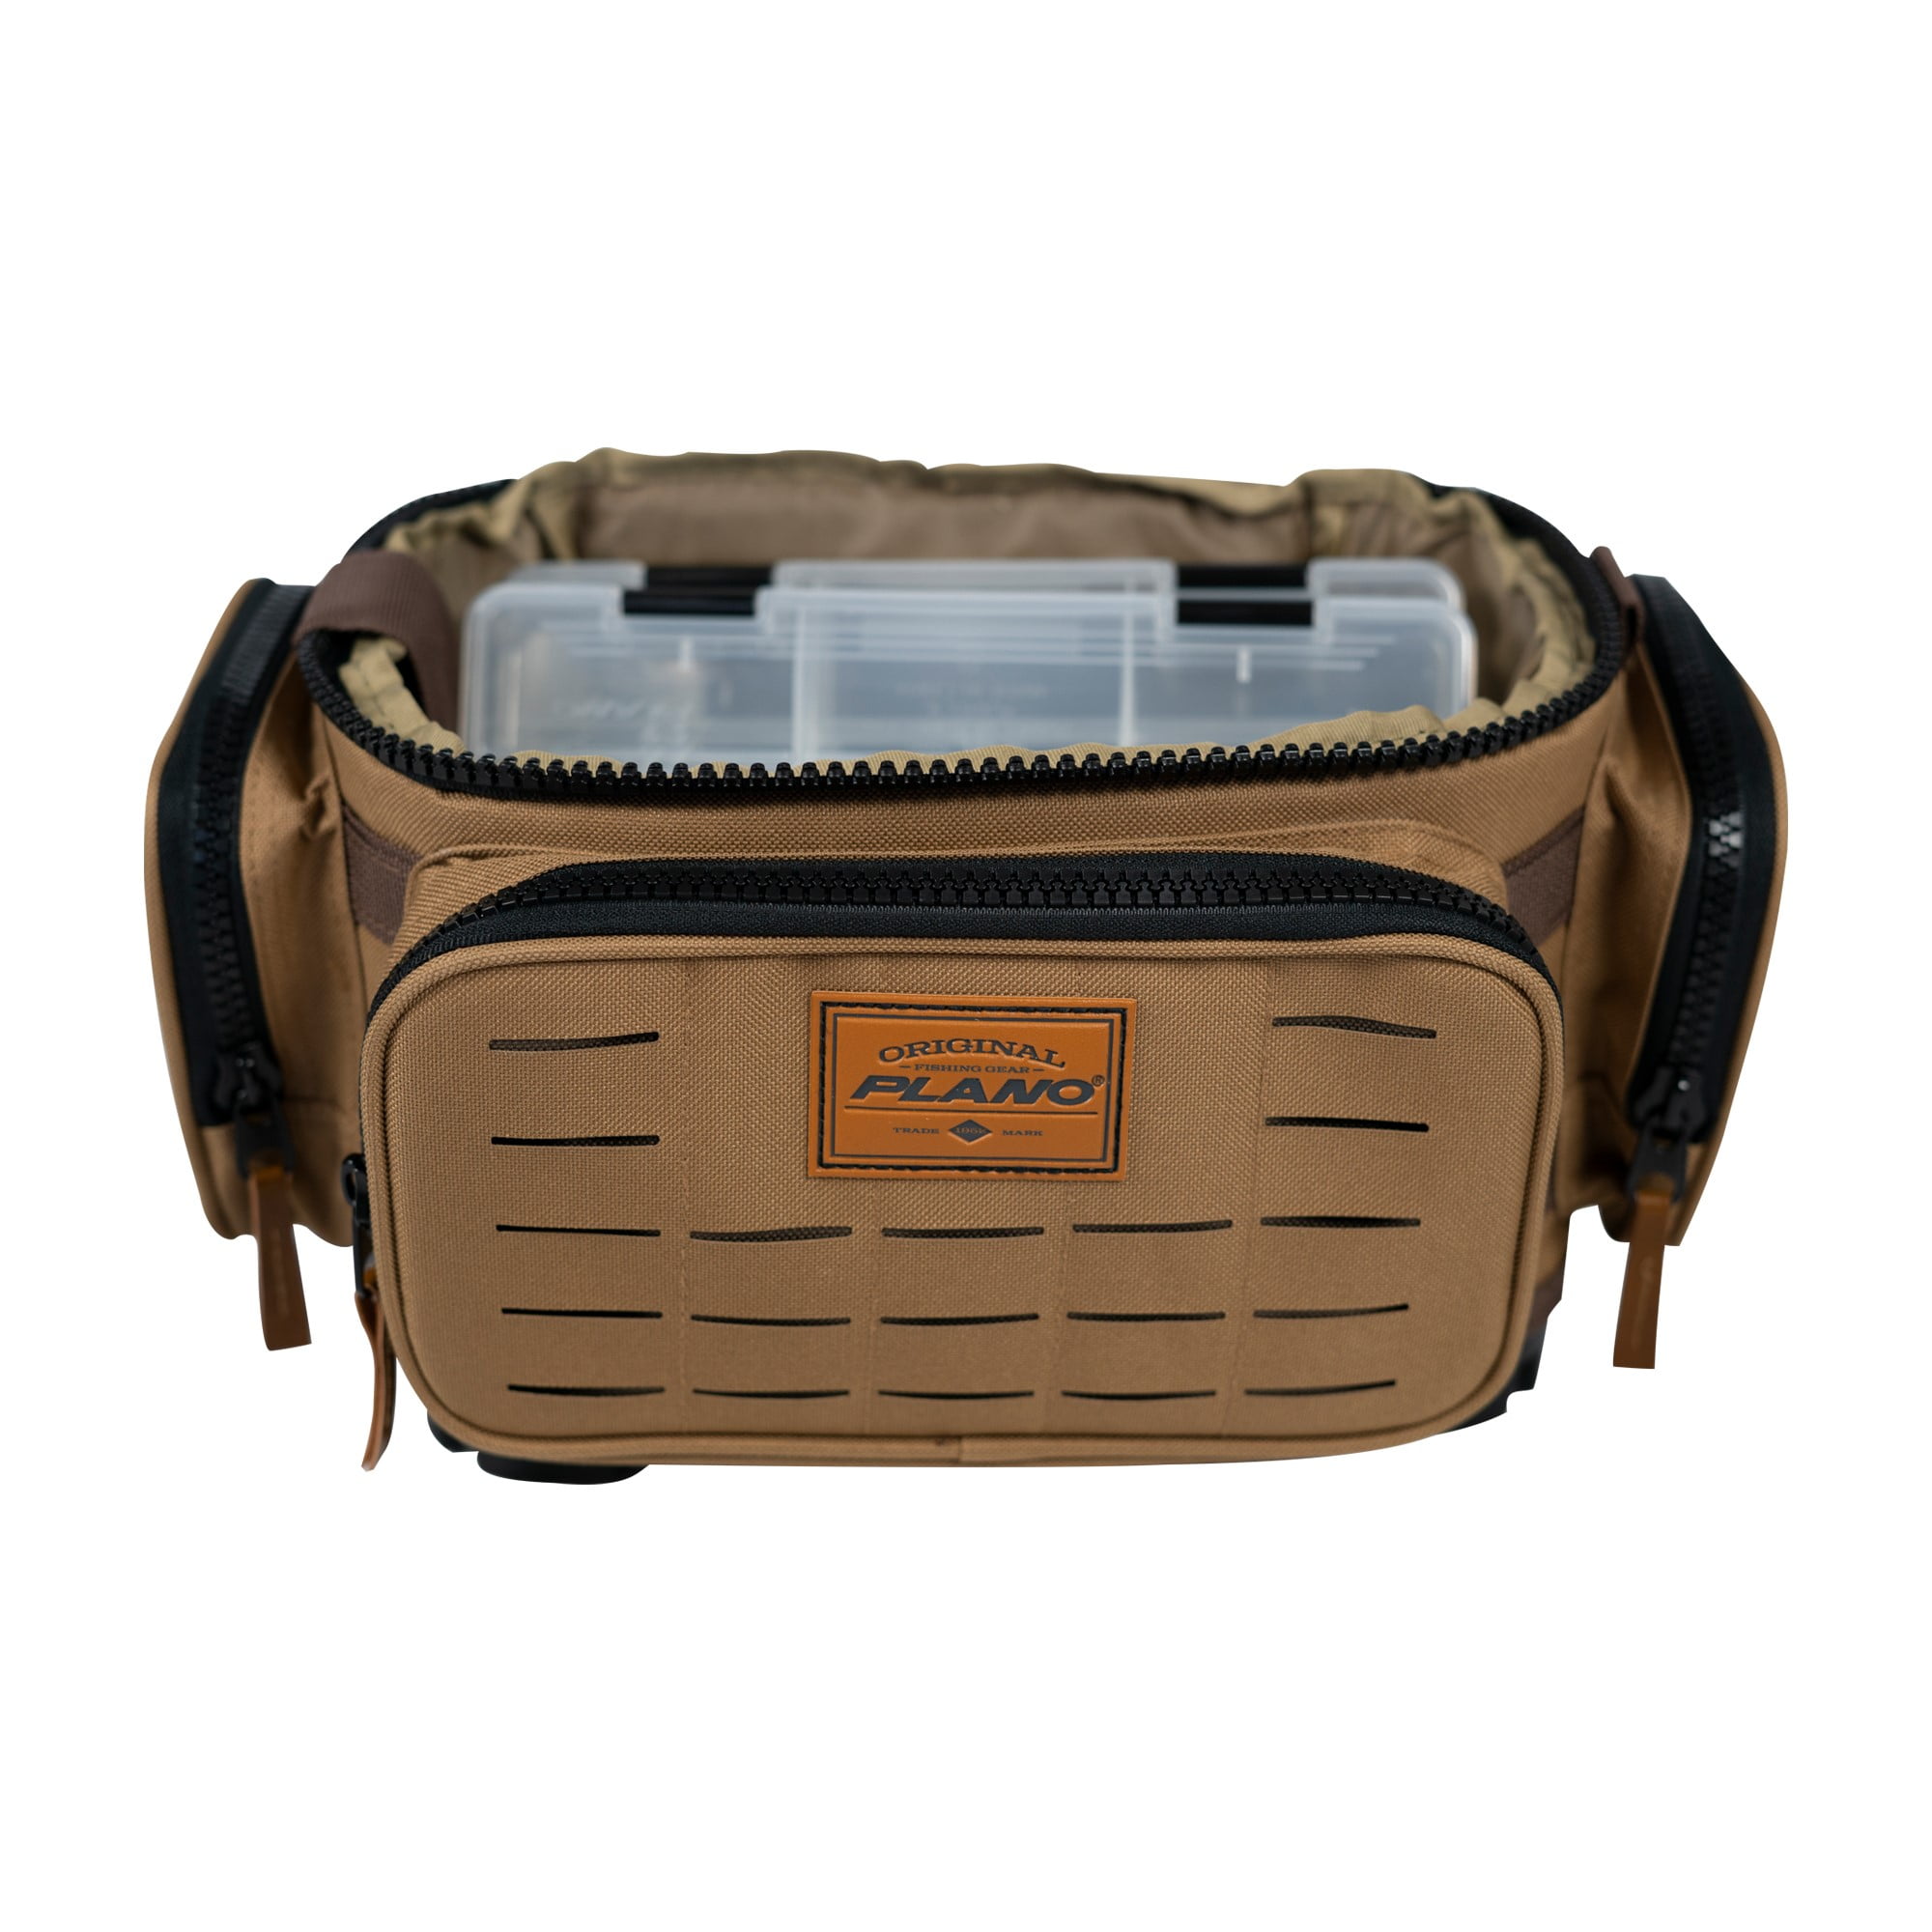 Plano Small 3500 Size Apprentice Fishing Tackle Bag, with Two 3500